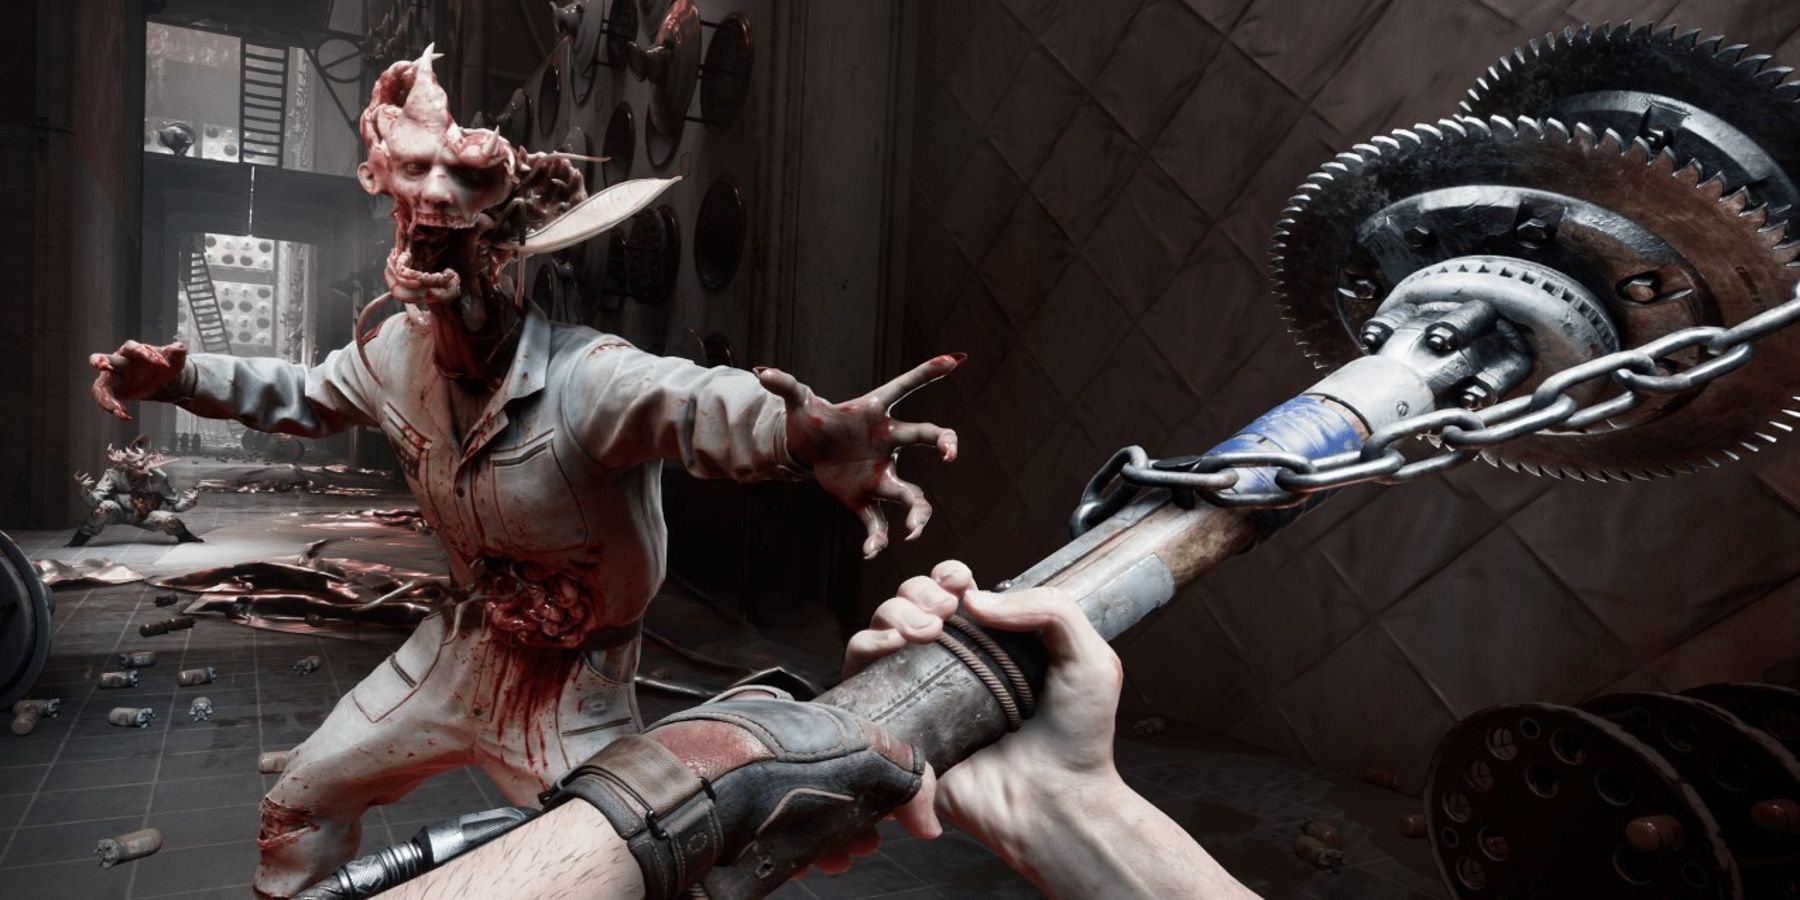 A promotional image from the upcoming FPS game Atomic Heart.